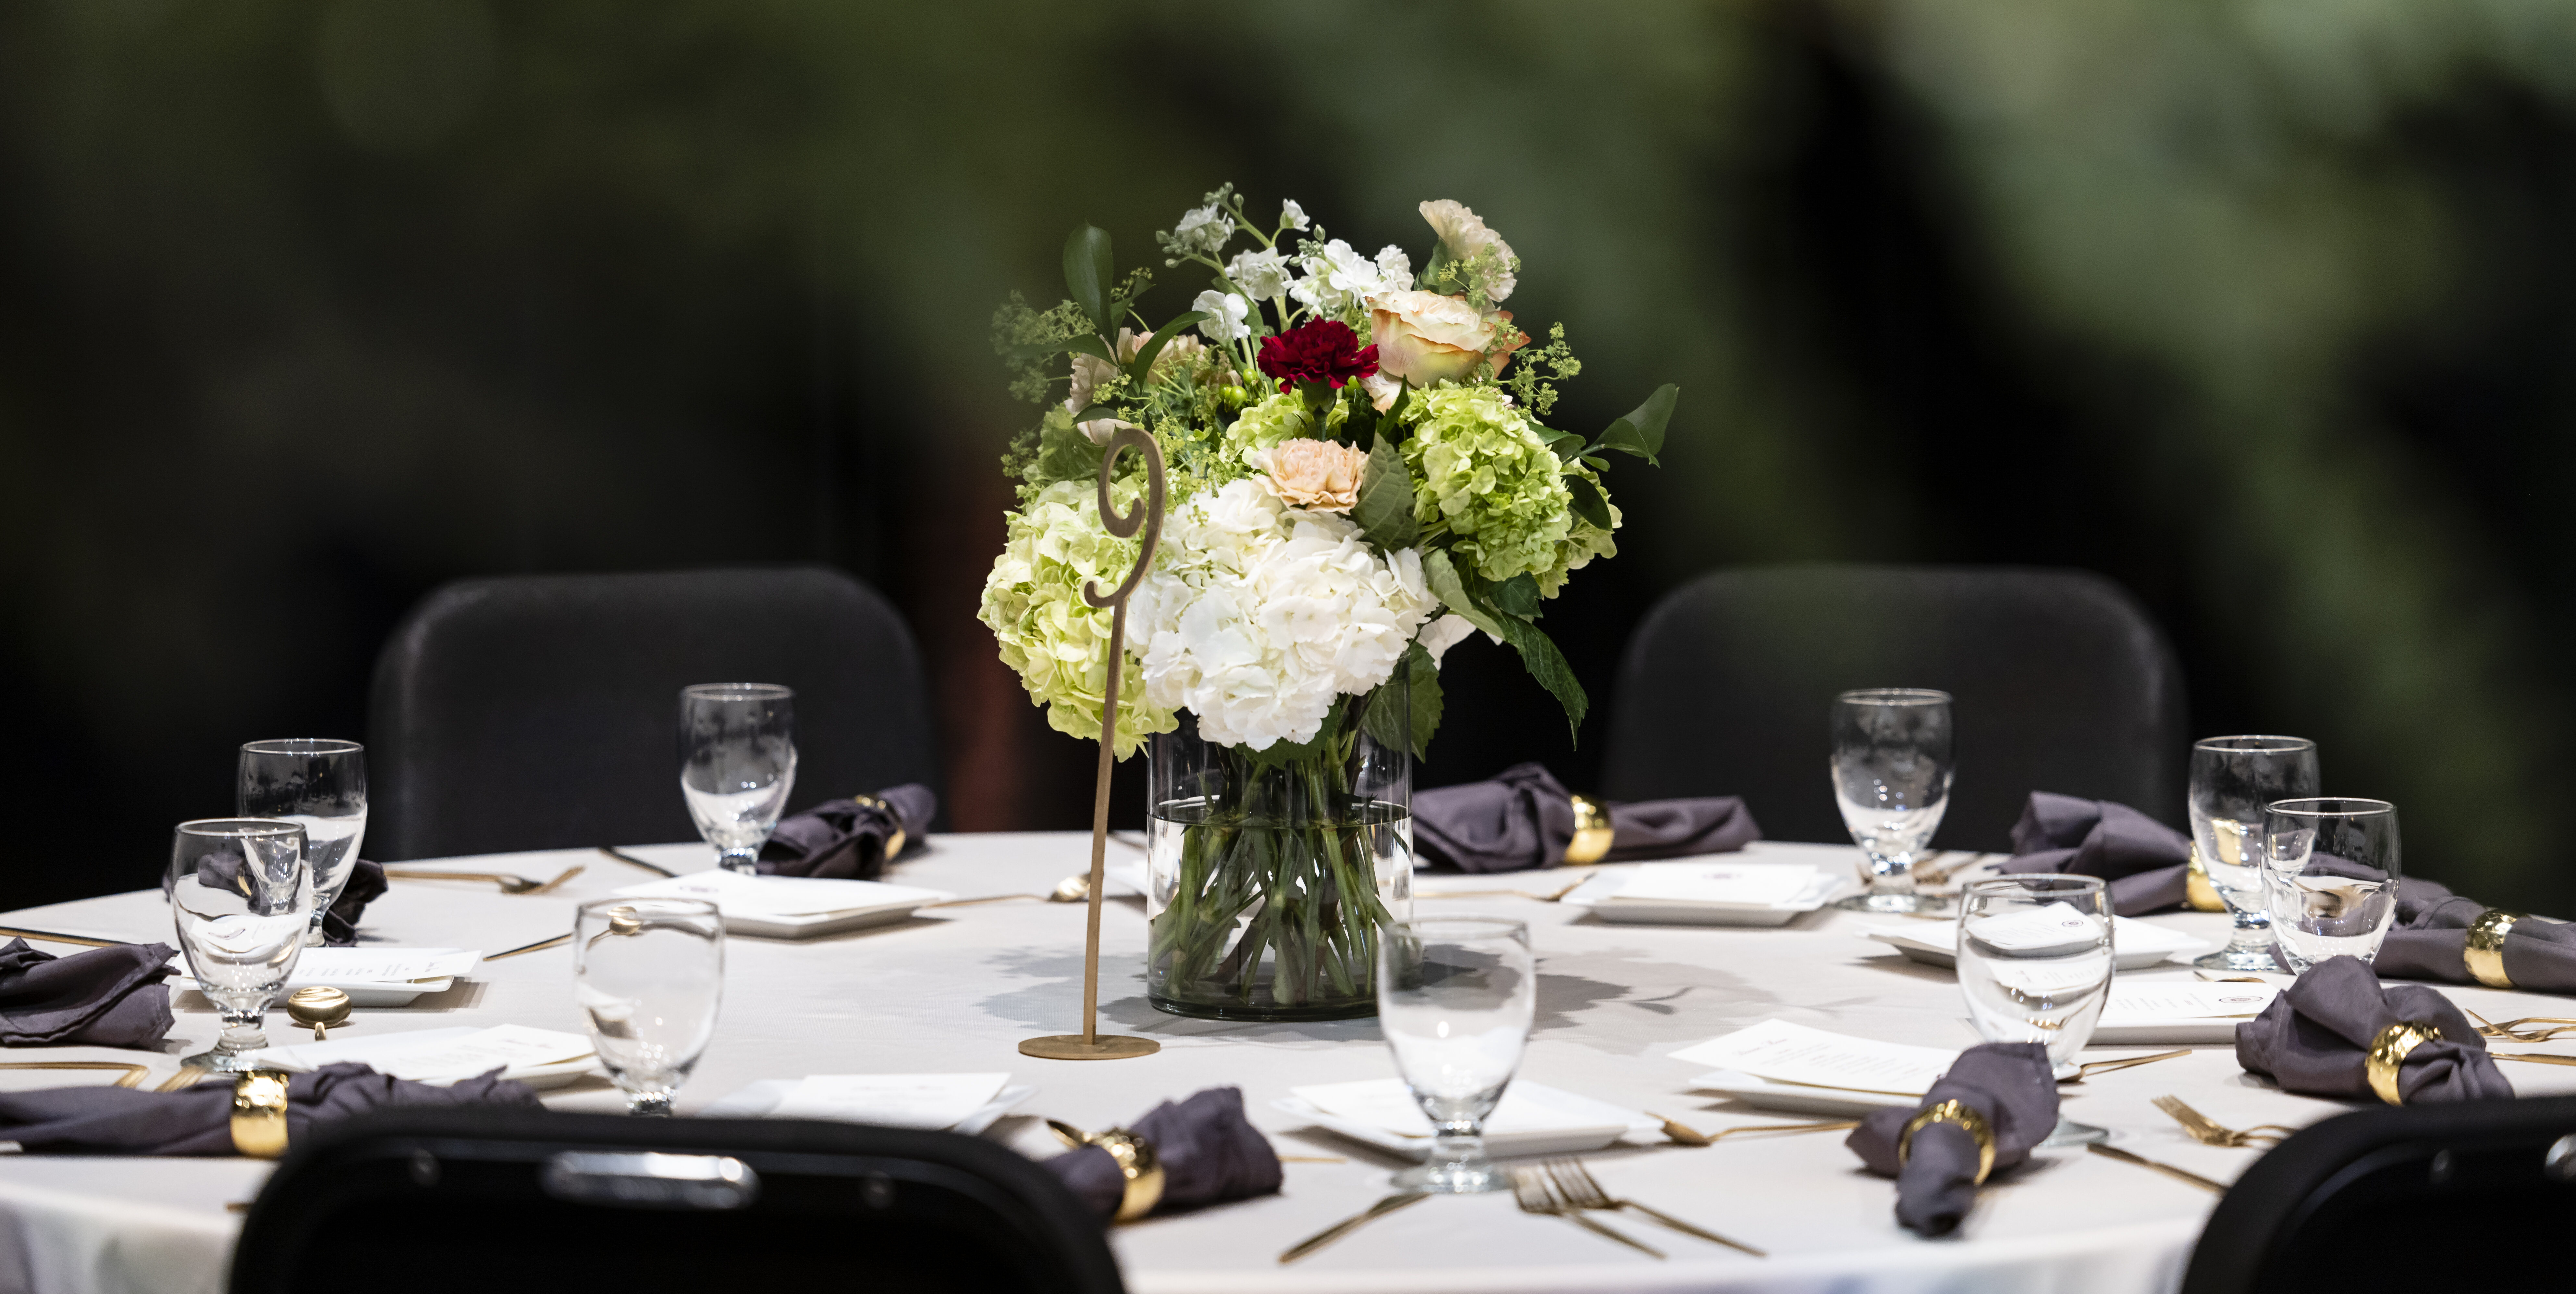 A table set with a beautiful flower arrangement